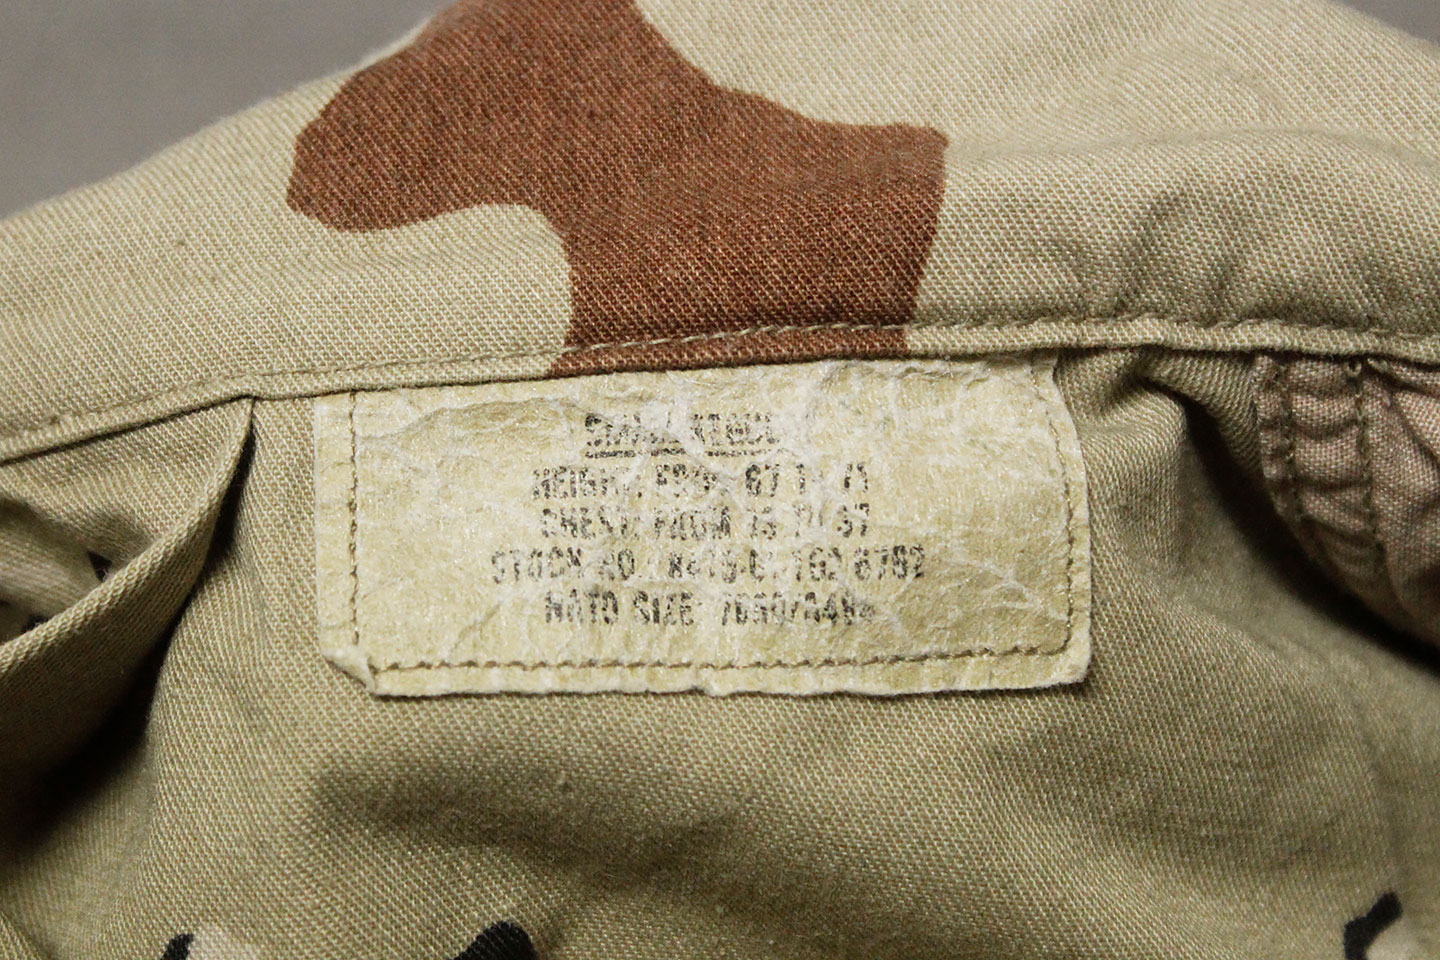 US Army 1980s “Chocolate Chip” jacket and pants . UA911 - Time Traveler ...